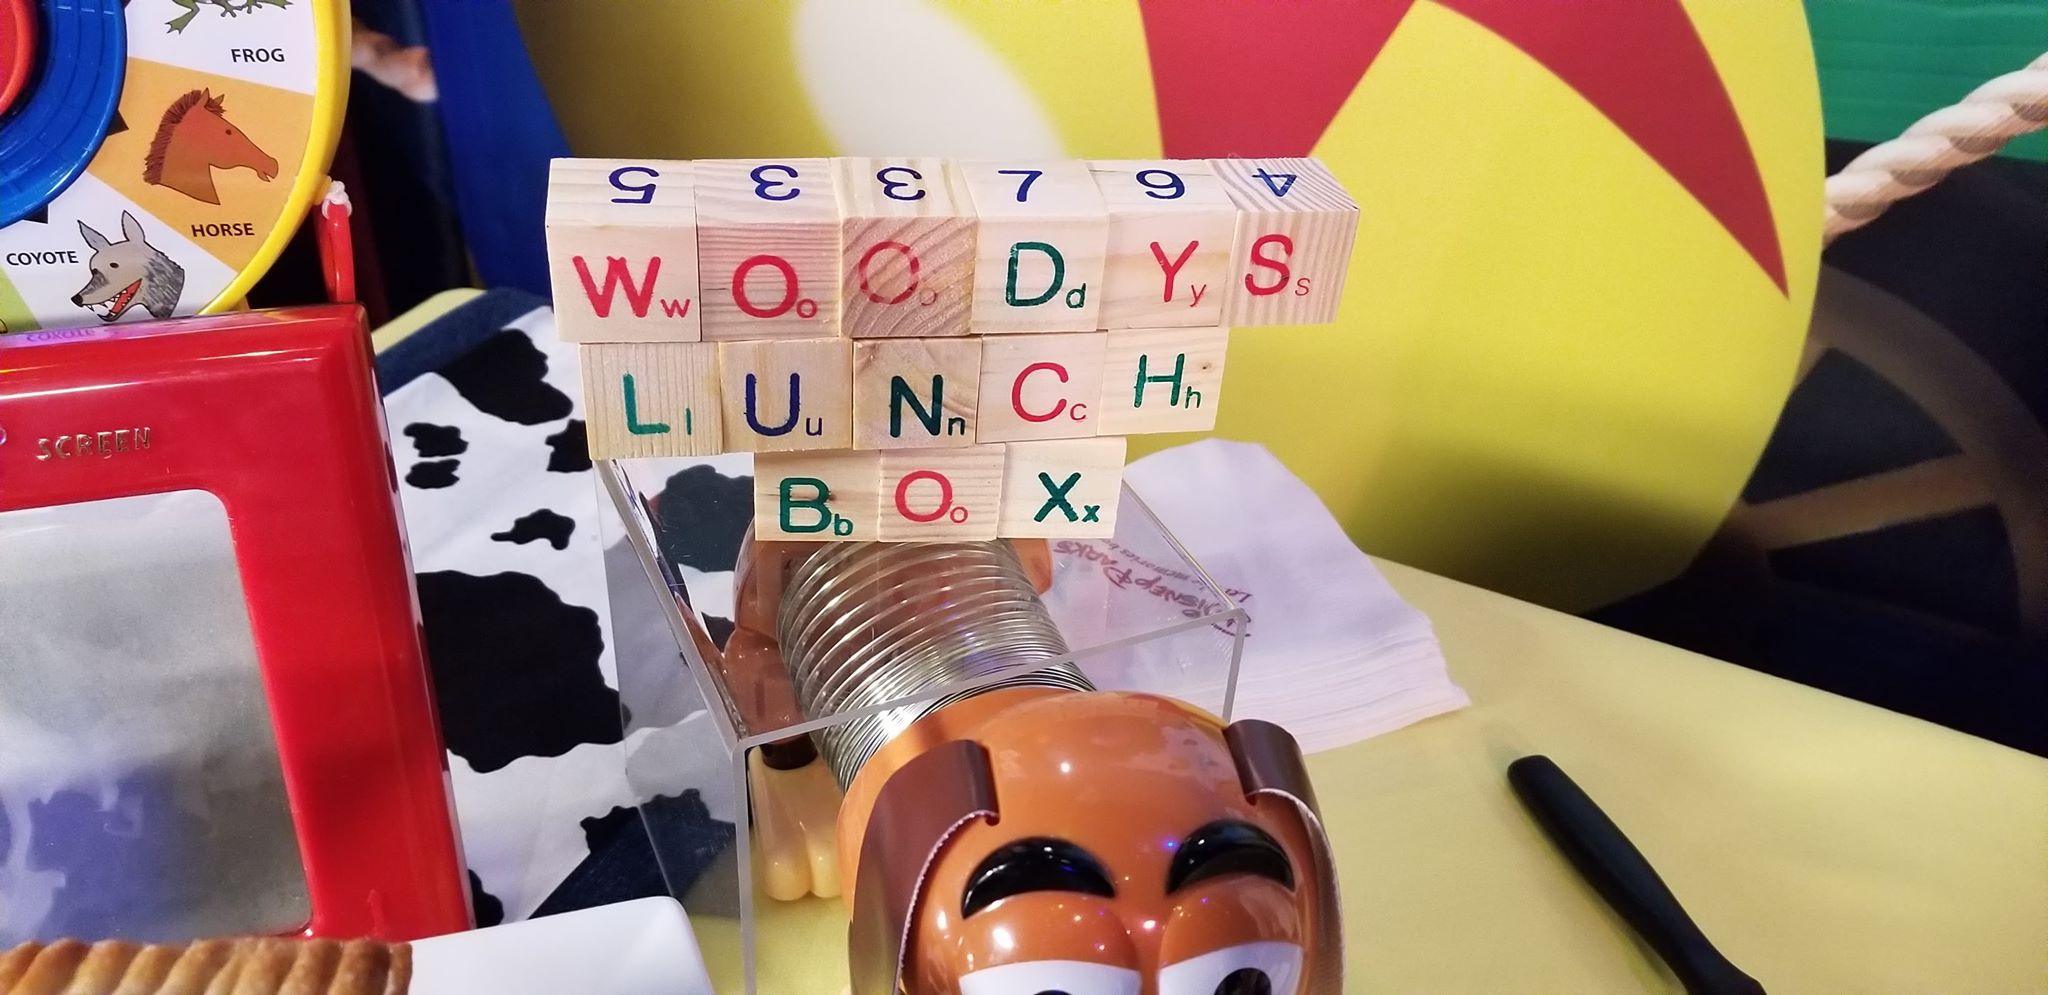 Check Out All the Delicious Options from Woody’s Lunch Box in Toy Story Land!